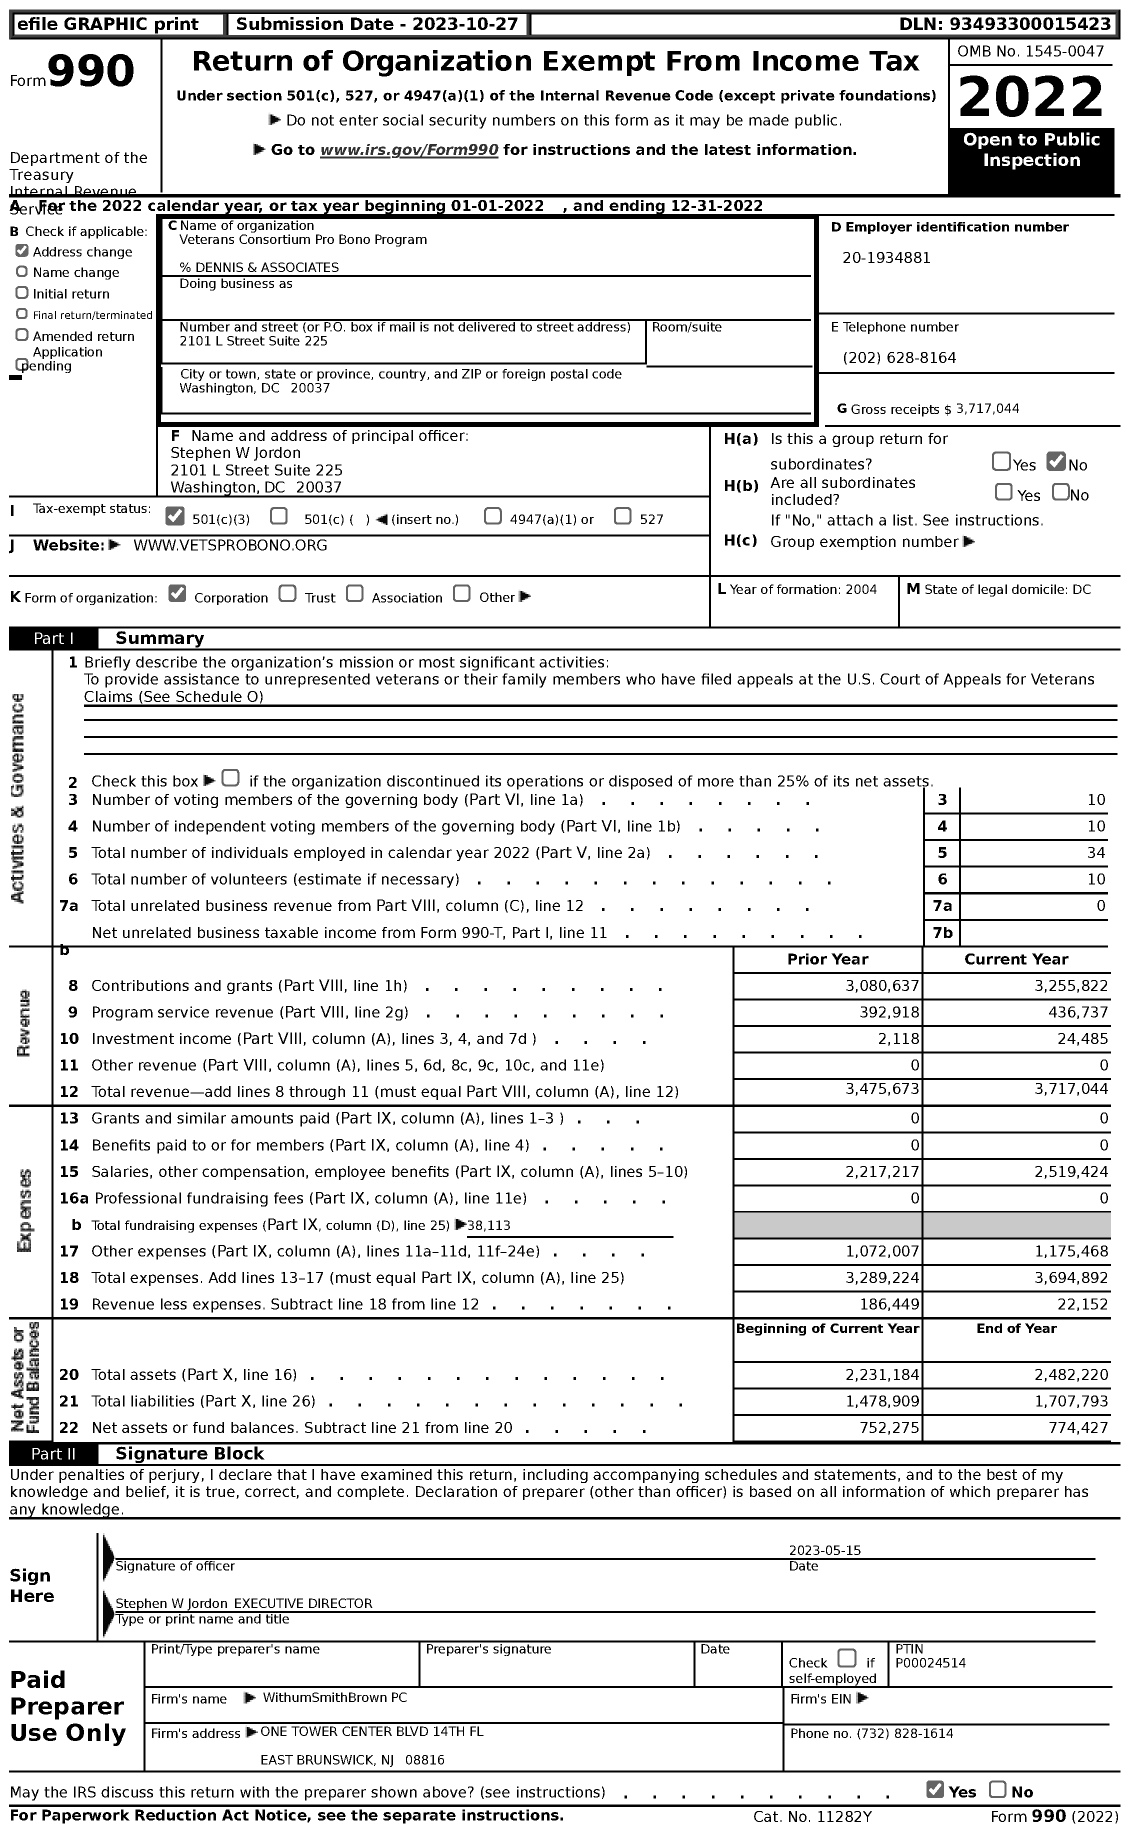 Image of first page of 2022 Form 990 for Veterans Consortium Pro Bono Program